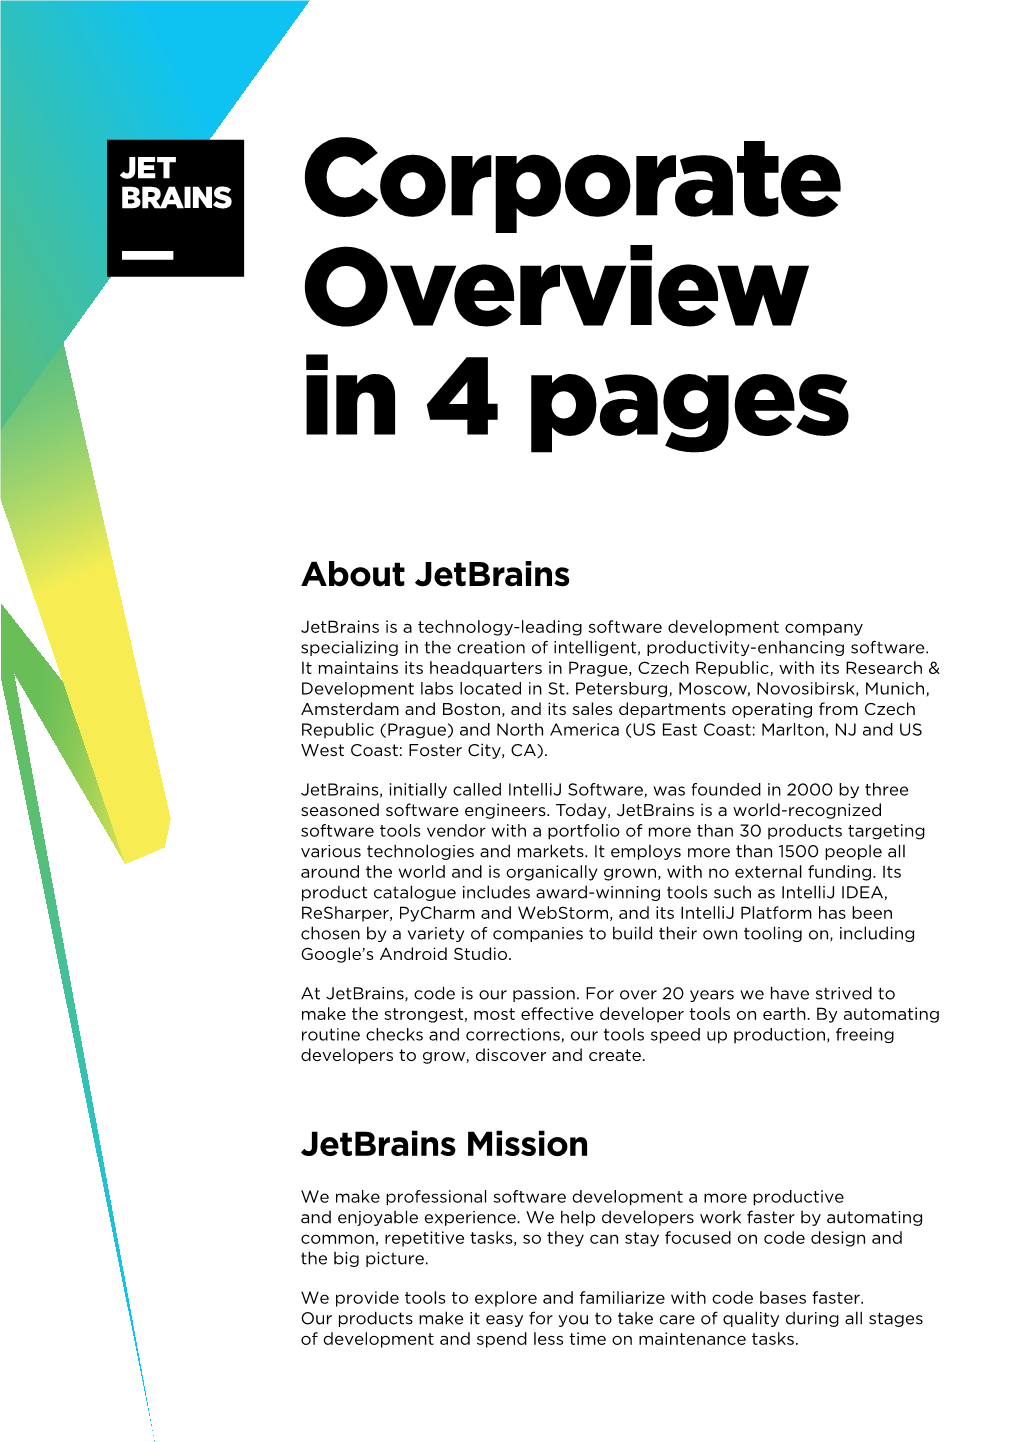 Jetbrains Corporate Overview in 4 Pages